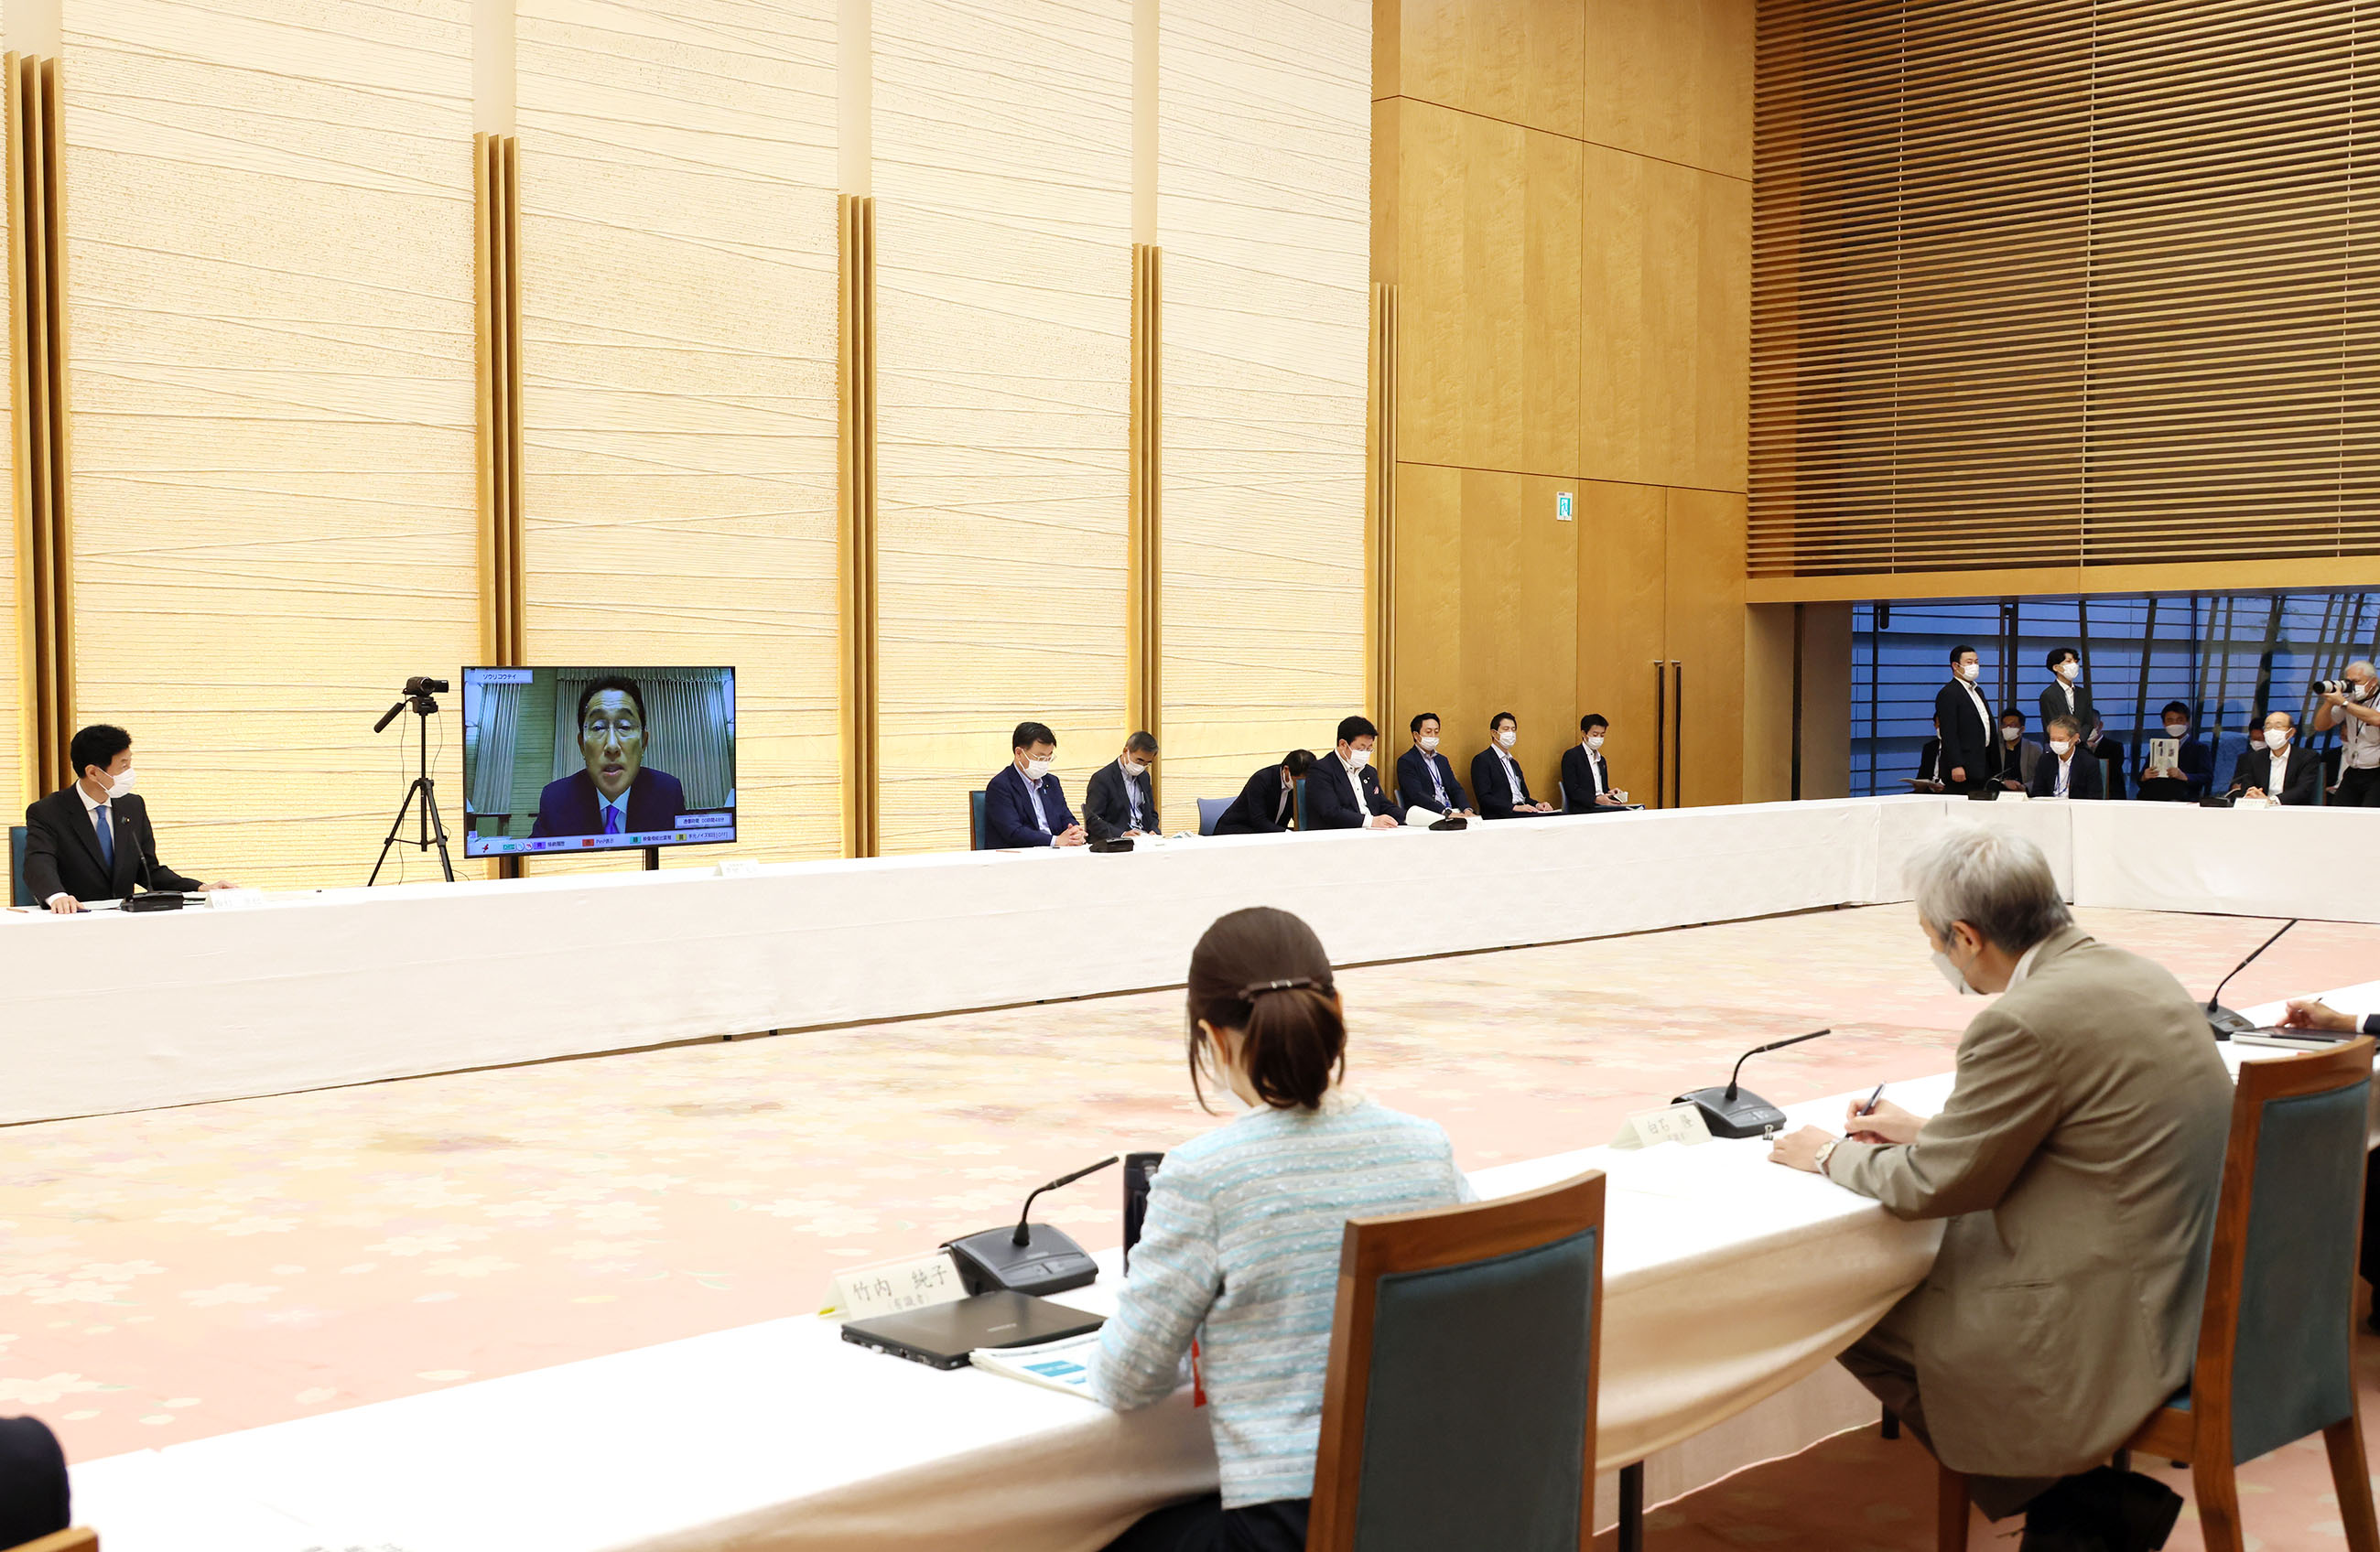 Photograph of the Prime Minister wrapping up a meeting (1)